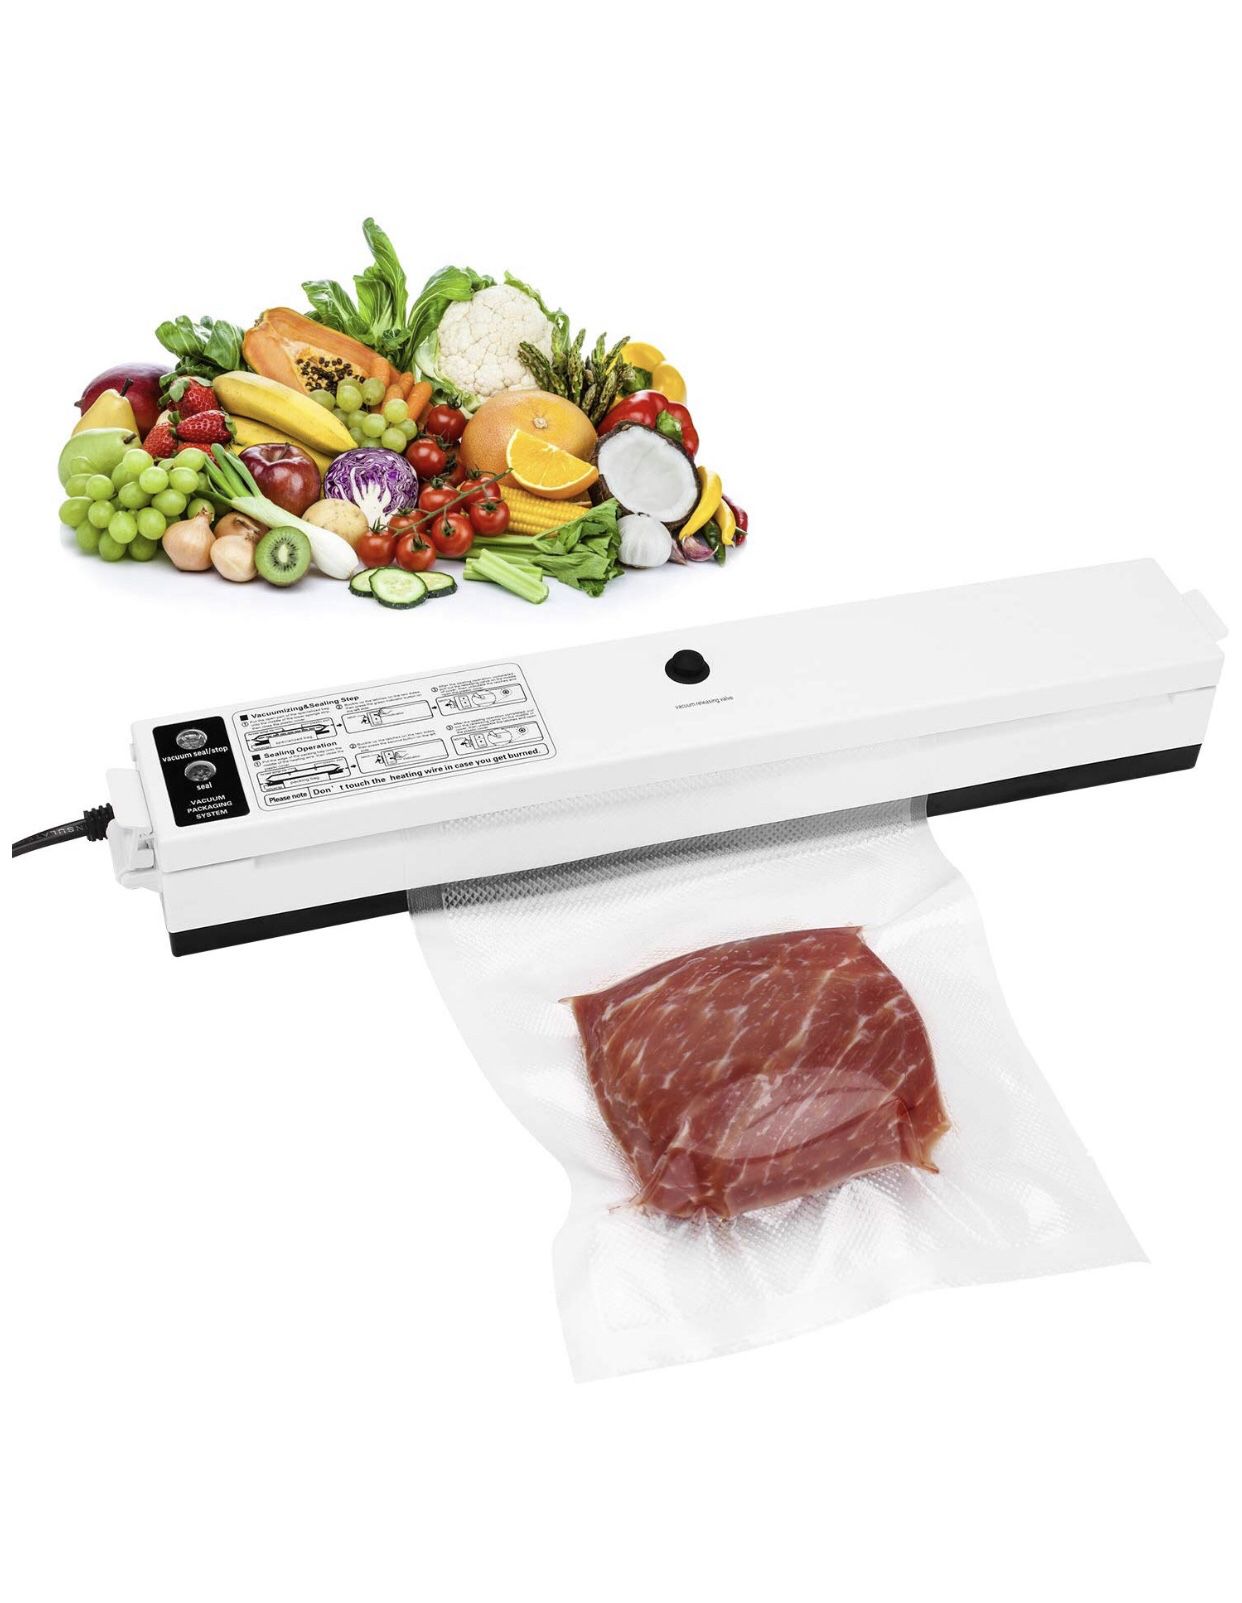 Food Sealer Machines One-button Vacuum Sealing System for Household Commercial Use of Food Preservation with Gift Vacuum Bag